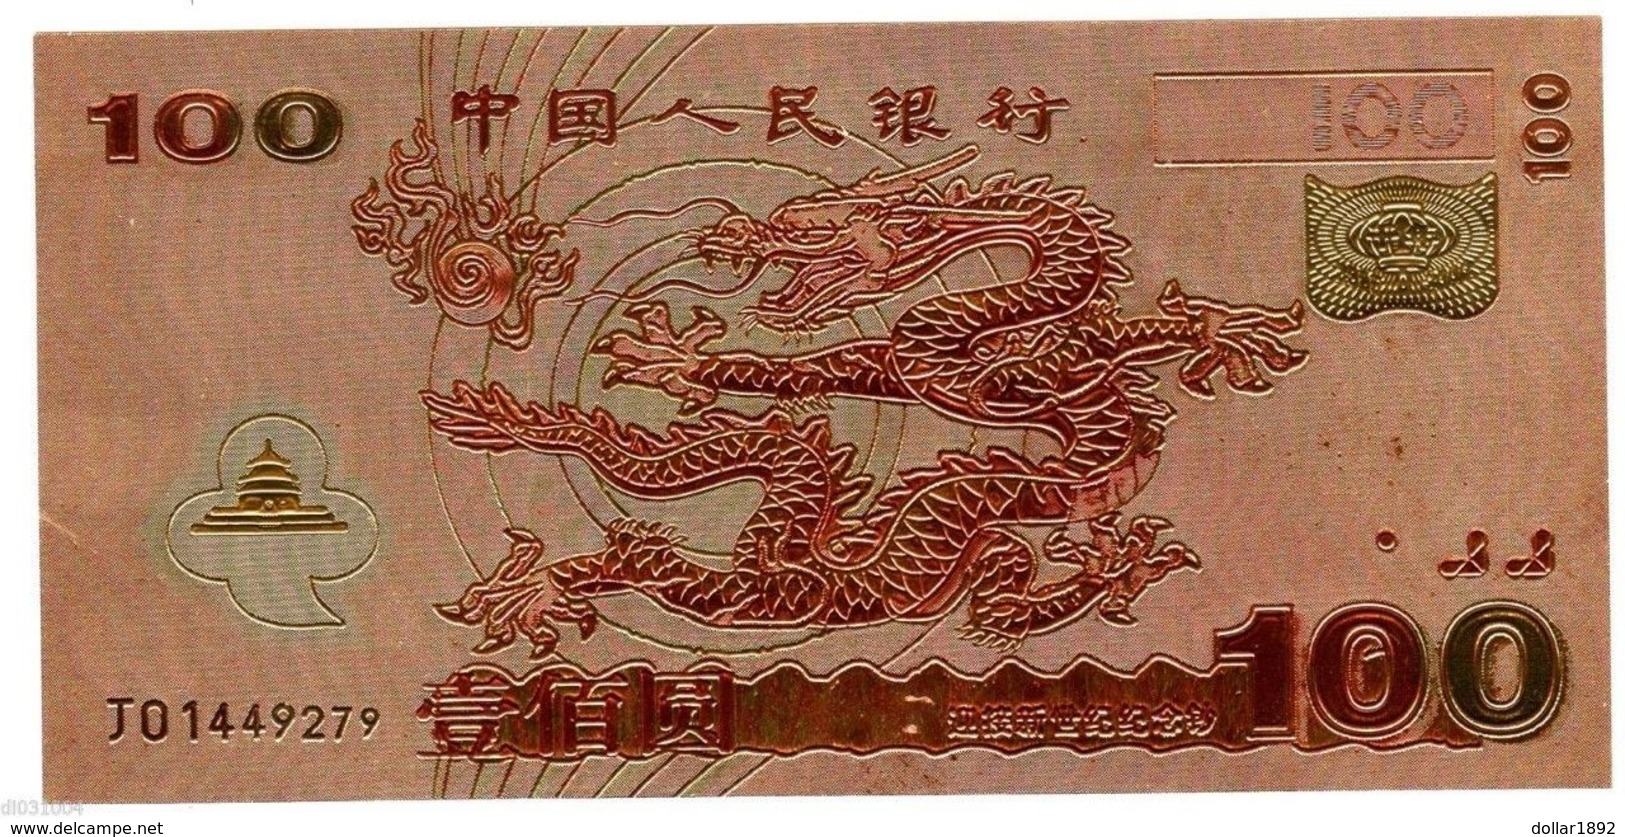 CHINE CHINA Billet 100 YUAN 2000 COMMEMORATIVE DRAGON PLAQUé D'OR NEUF UNC - Chine